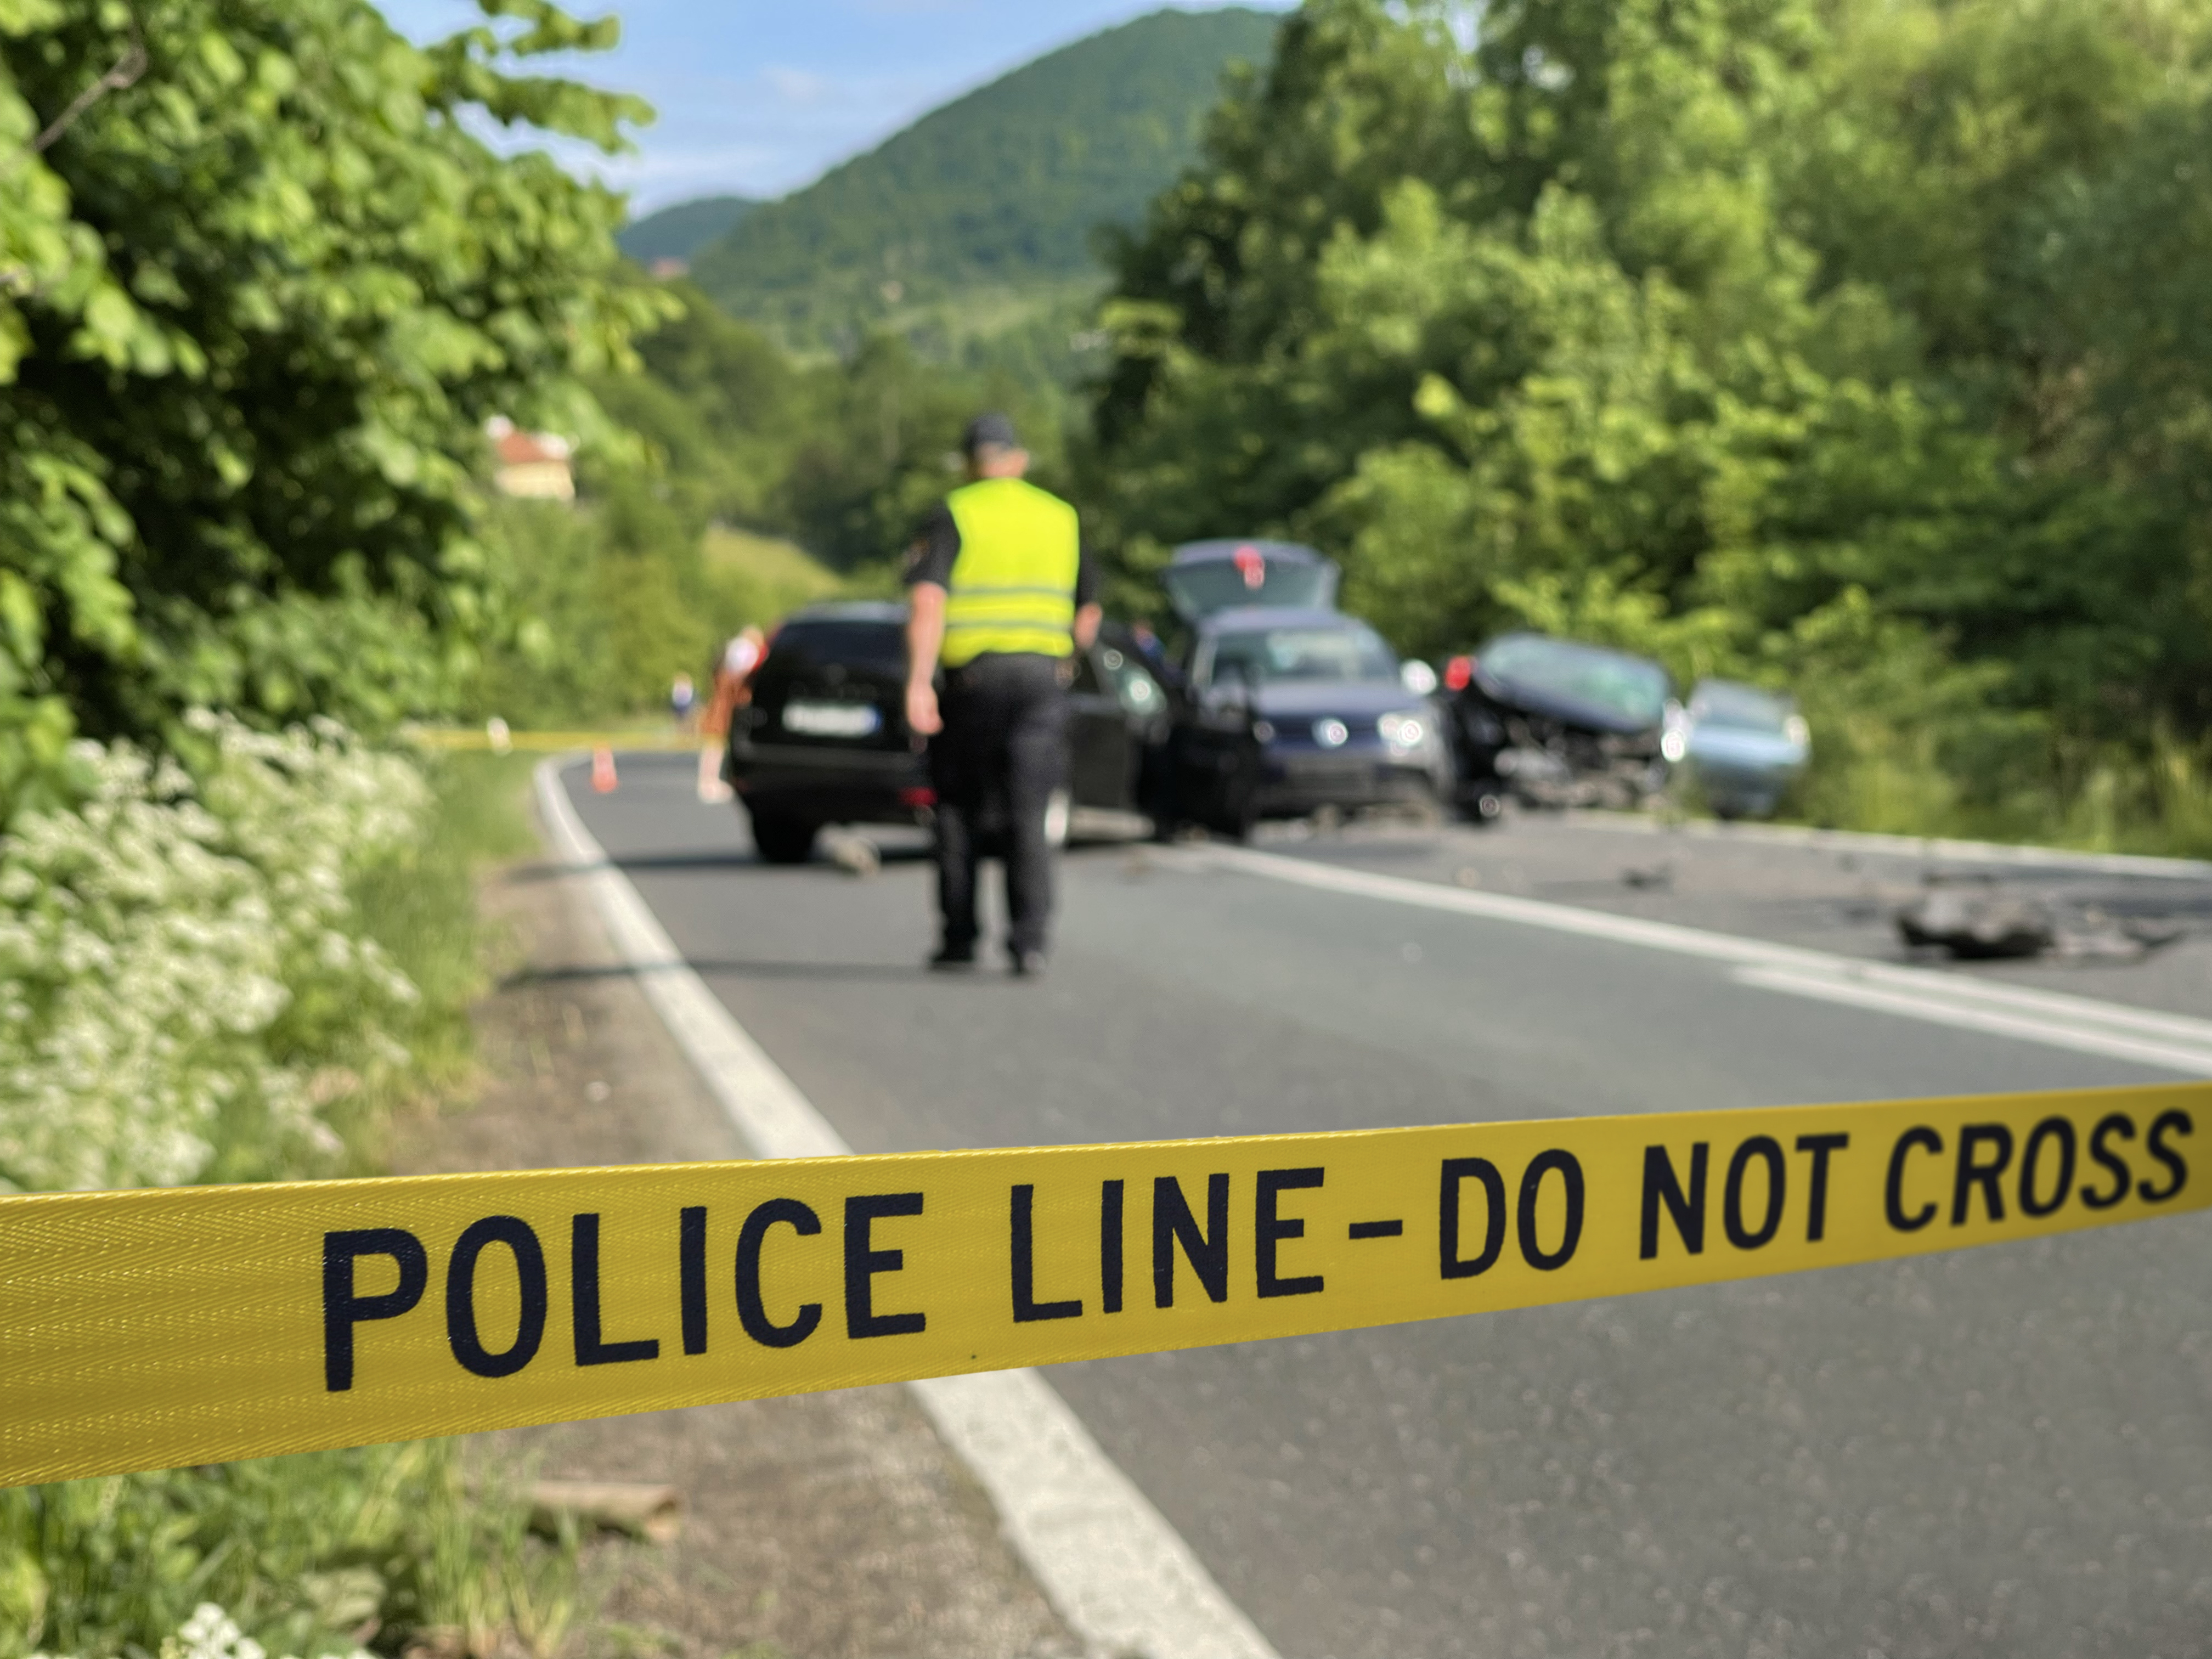 Police yellow line on traffic accident | Source: Getty Images